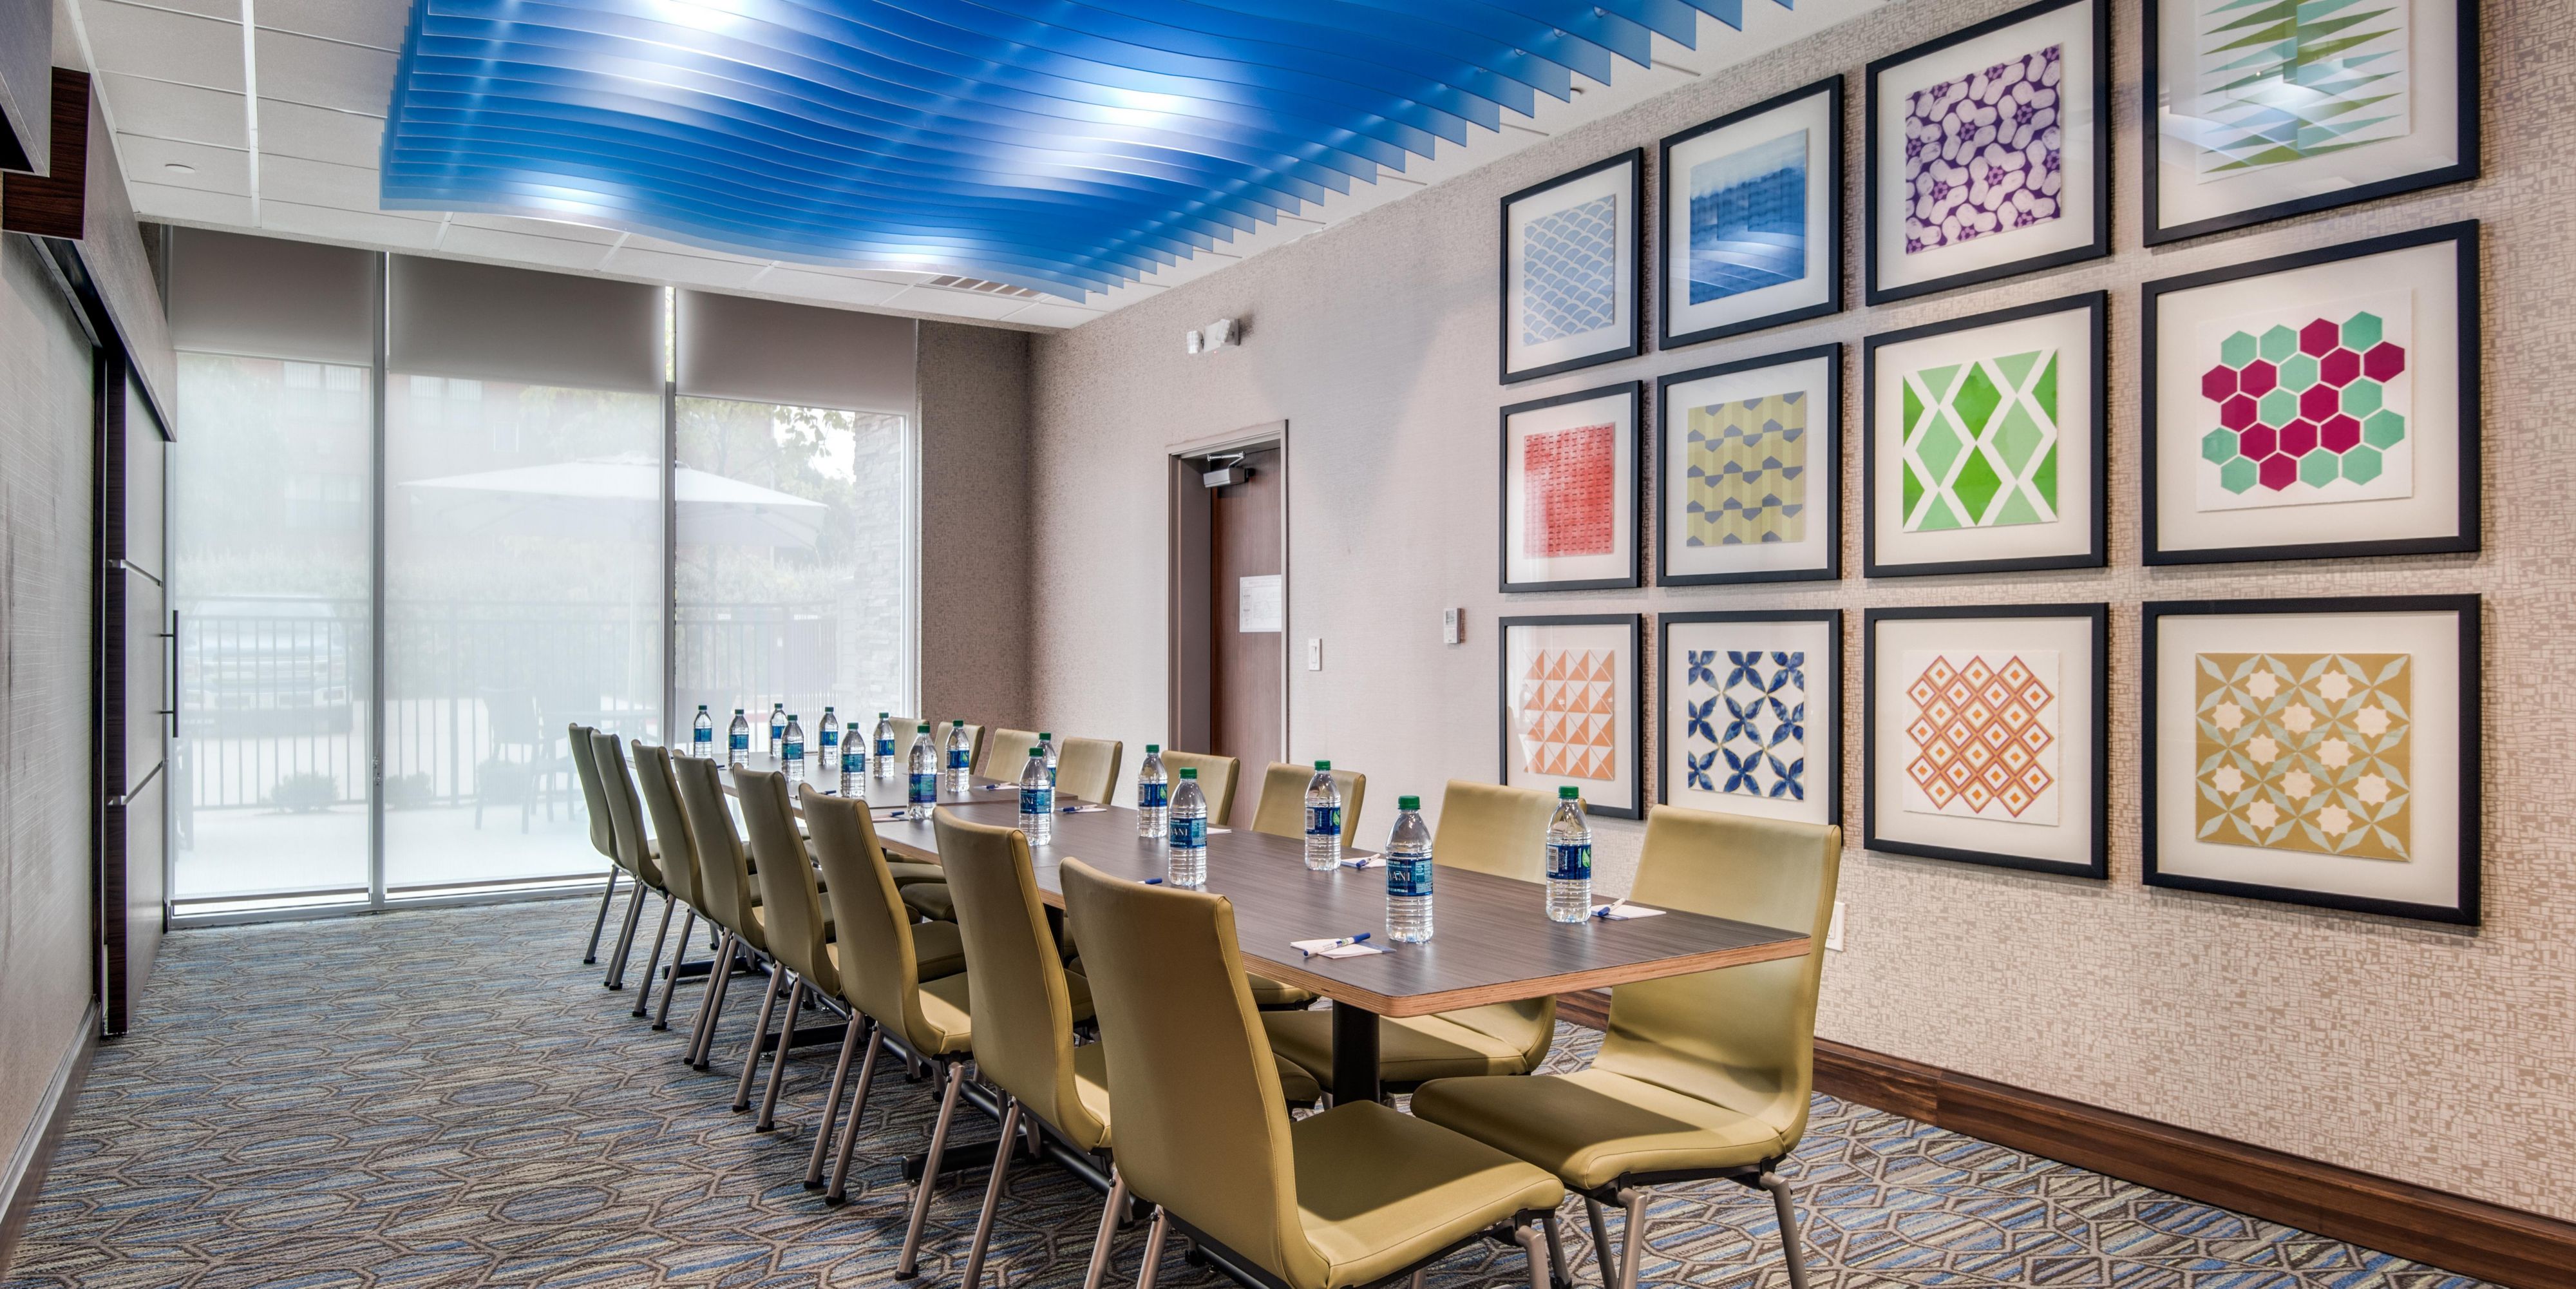 Small meetings play a vital role in the success of many organizations.  Are you planning a small corporate meeting, retreat or brainstorming session?  Our flexible meeting space is sure to lead to big ideas!  Whether you're a group of 5 or 20, we can help!  Our Director of Sales is dedicated to making your meeting a huge success!  